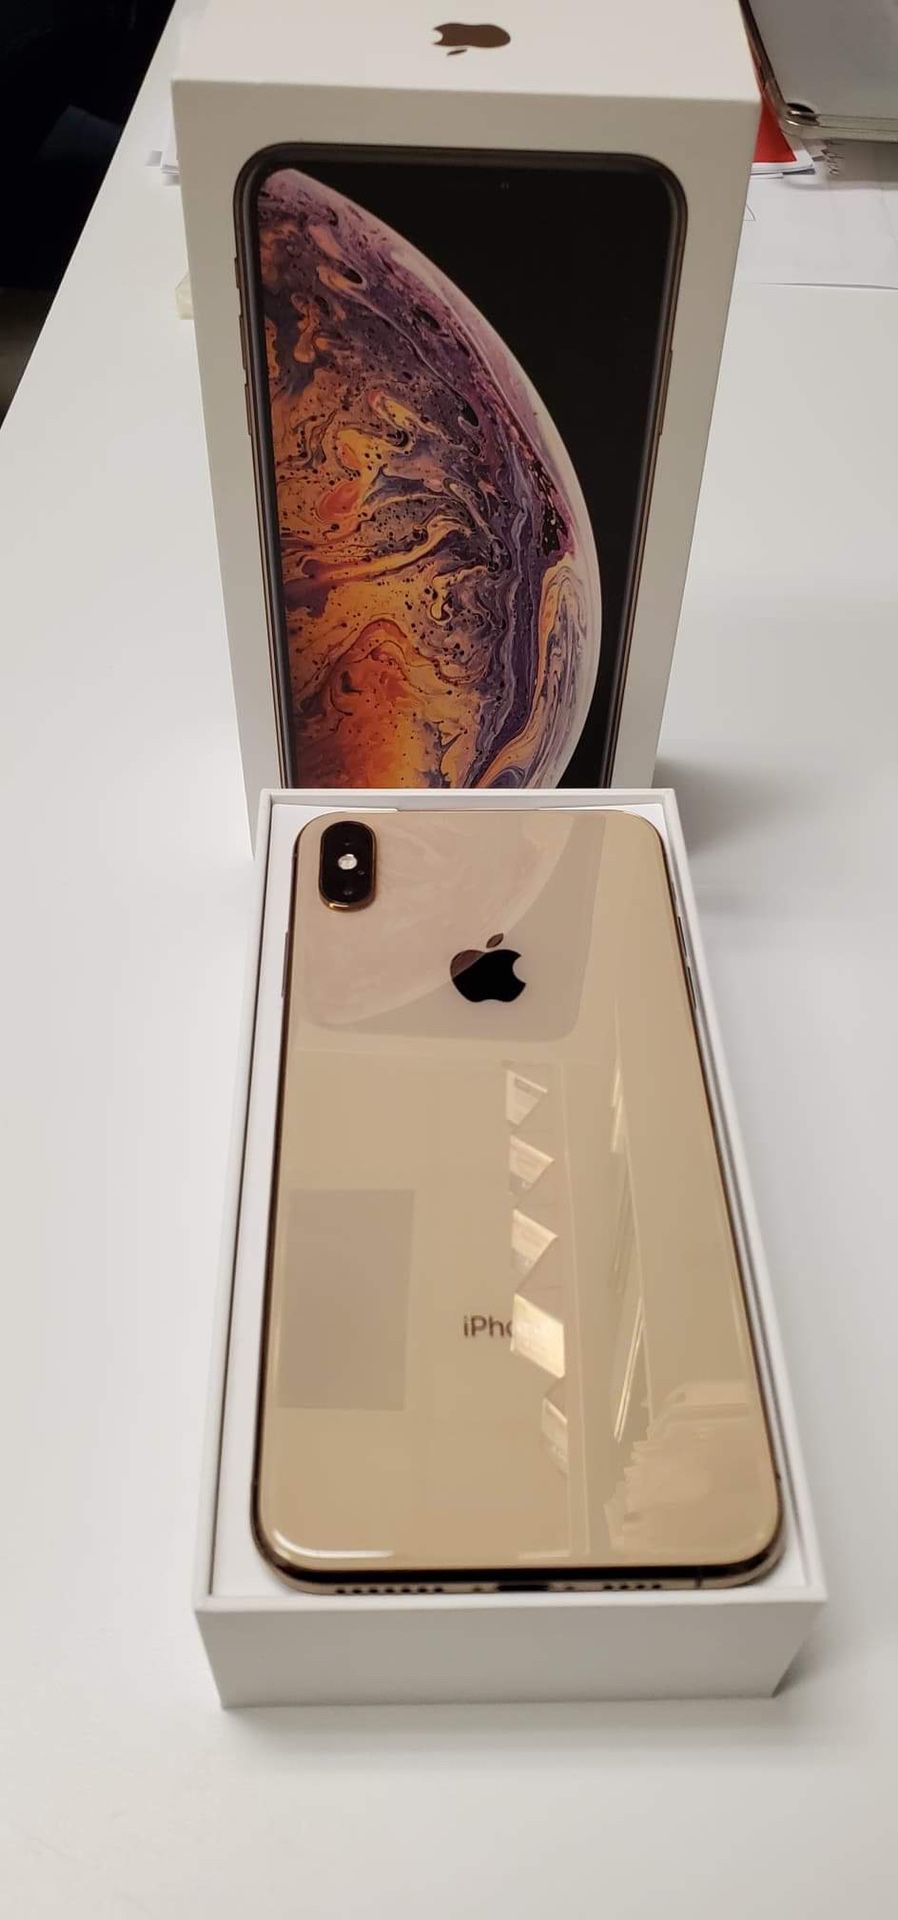 iPhone XS Max 256 GB color Gold - UNLOCKED